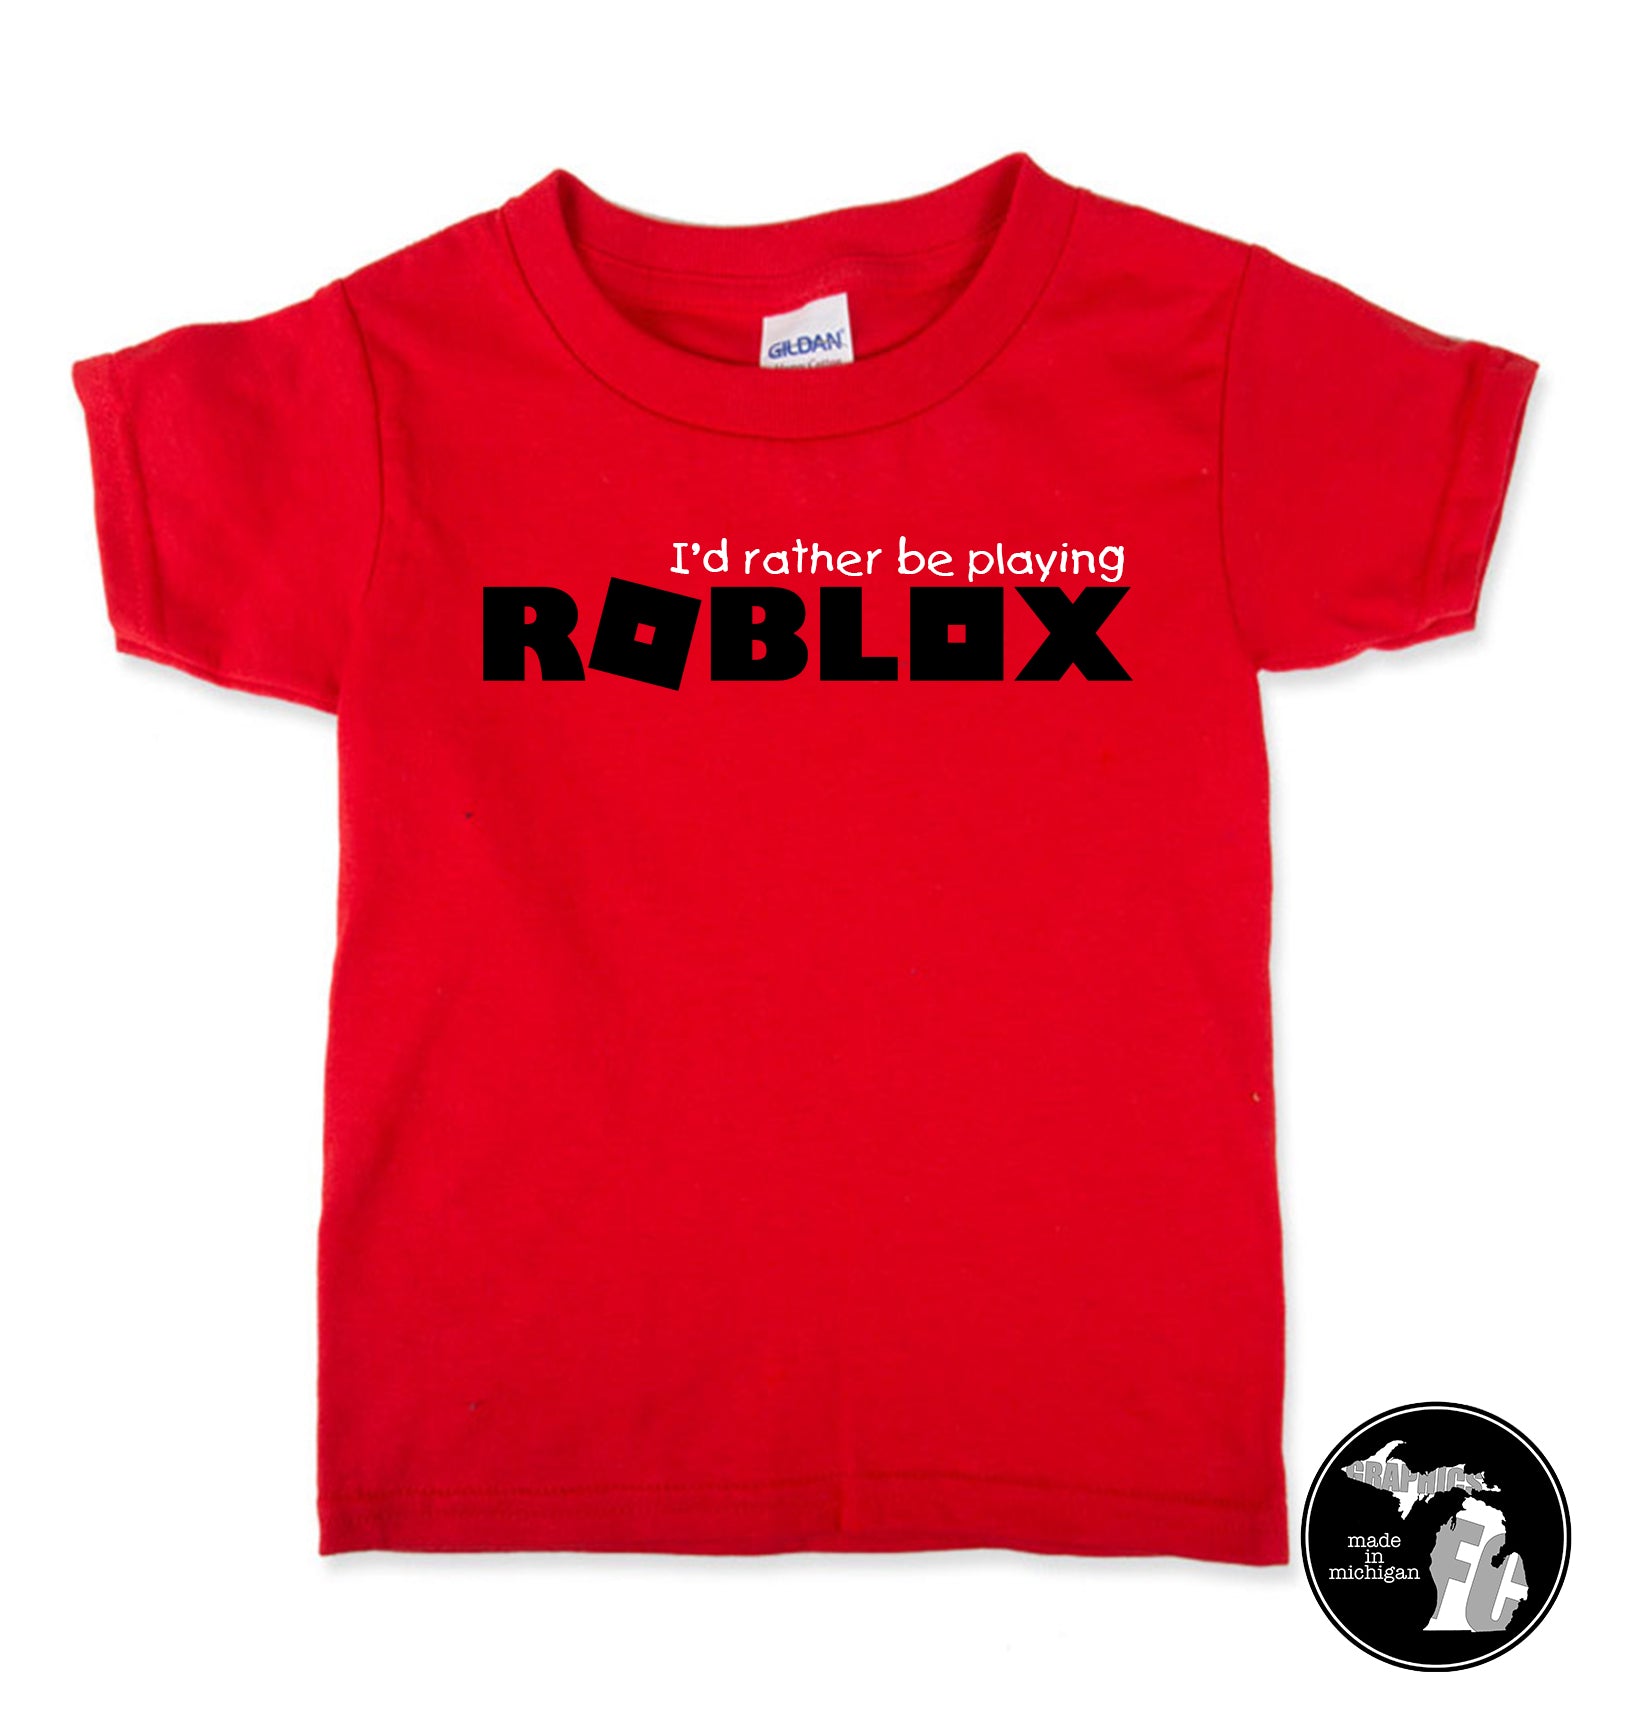 Roblox T Shirt With Personal User Name Kids Shirt Child Adults Furniture City Graphics - logo red name roblox